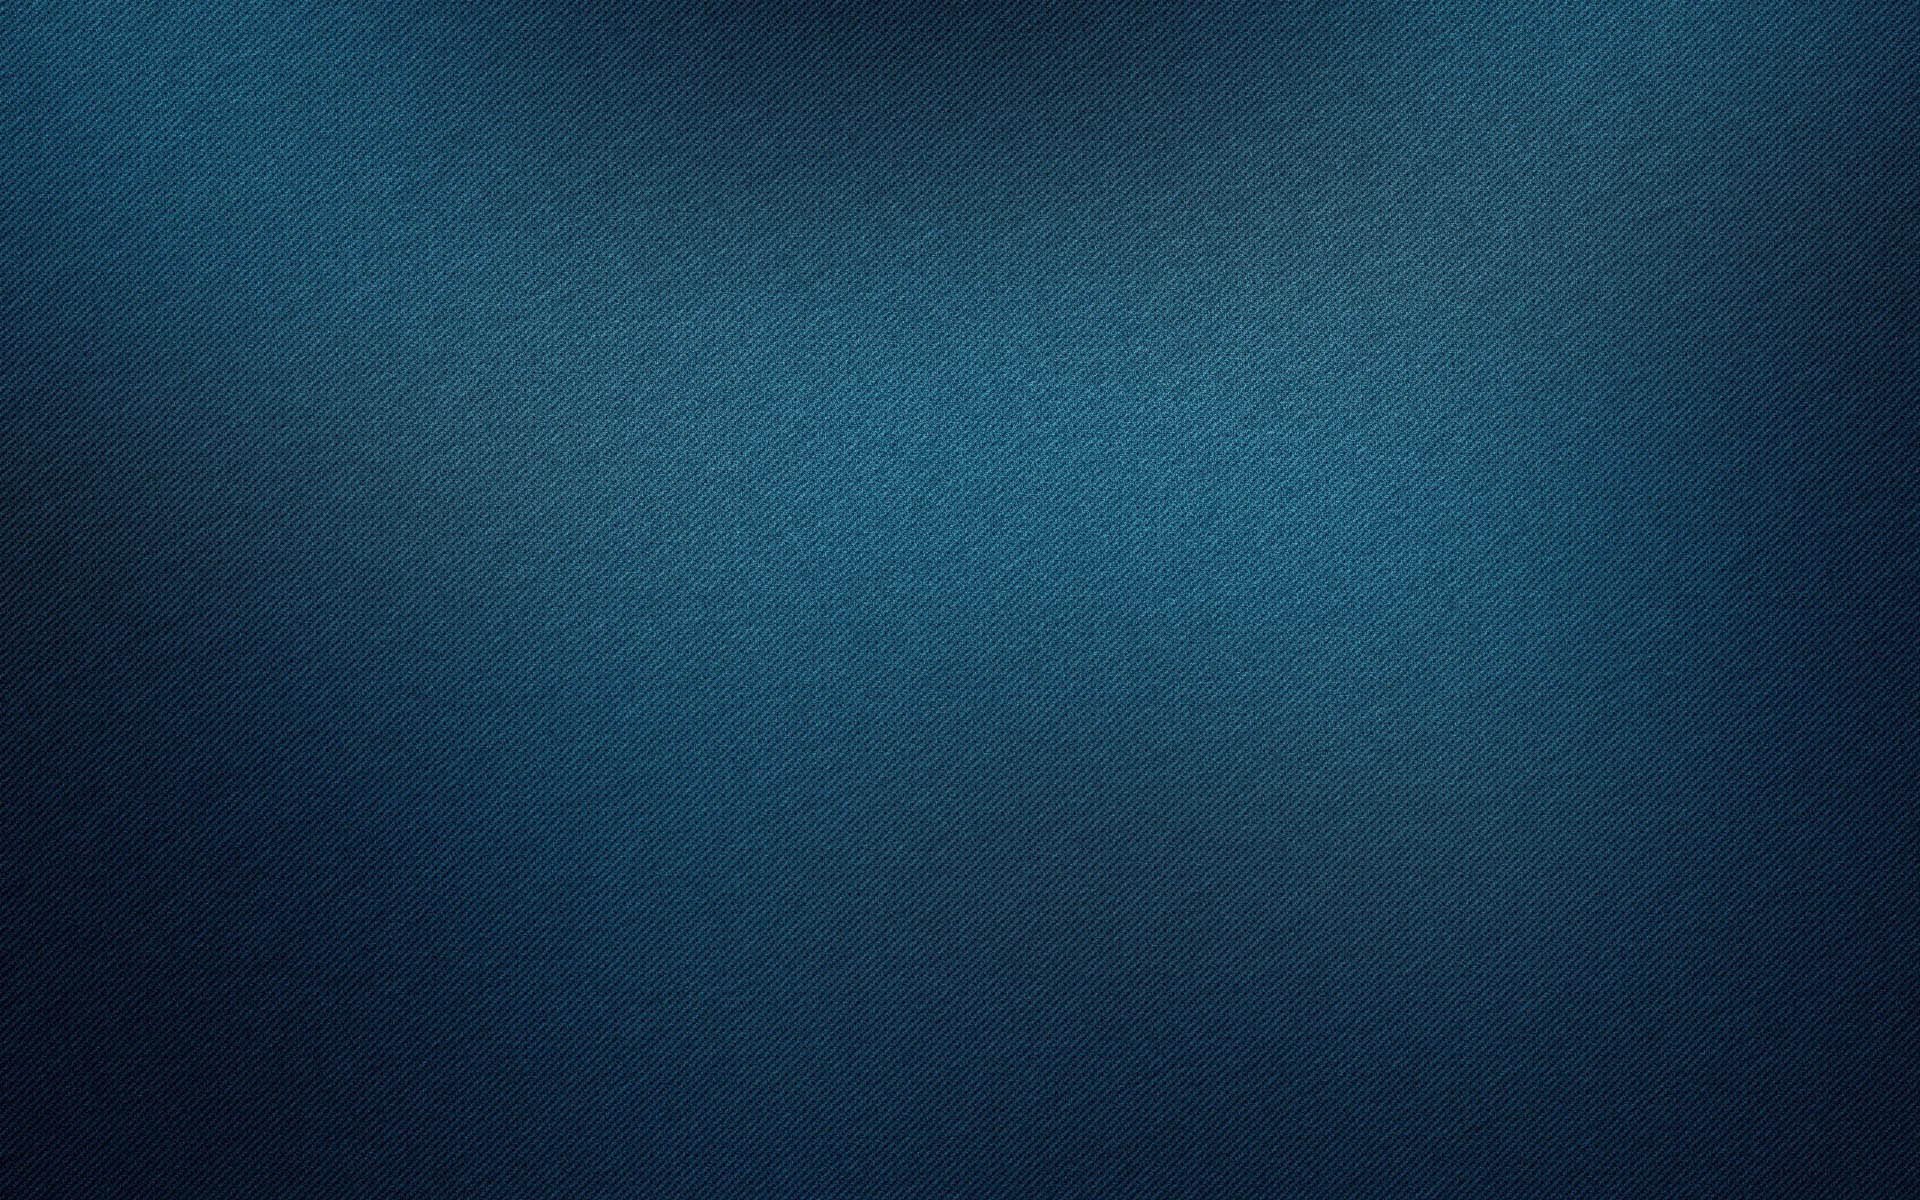 Wallpapers minimalistic simple textures on the desktop